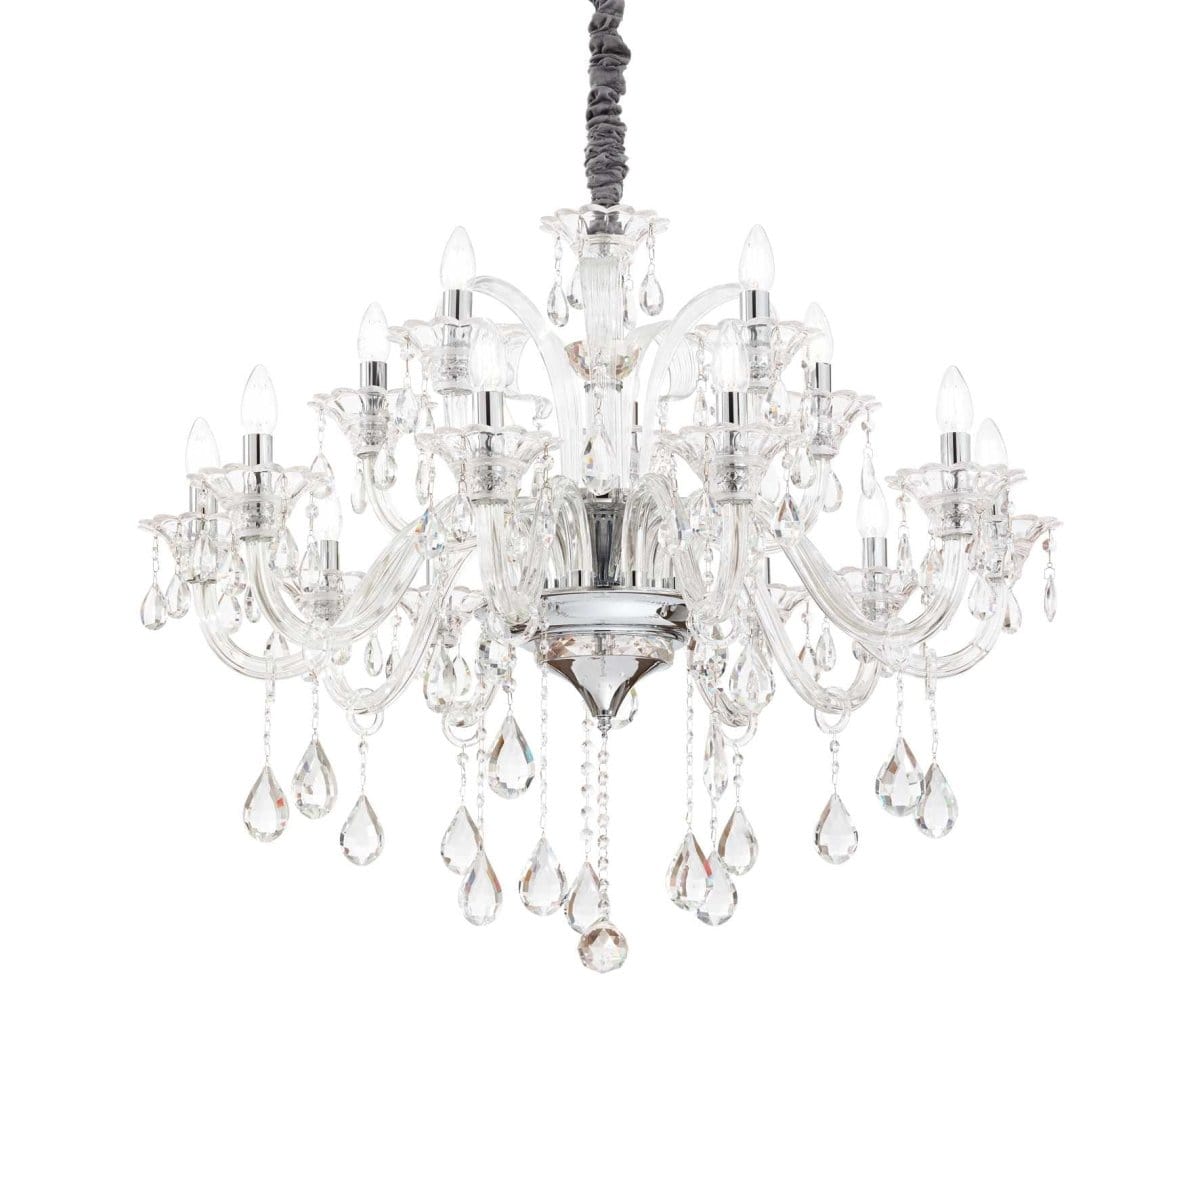 Ideal Lux Lighting Chandeliers Clear Colossal Crystal Chandelier